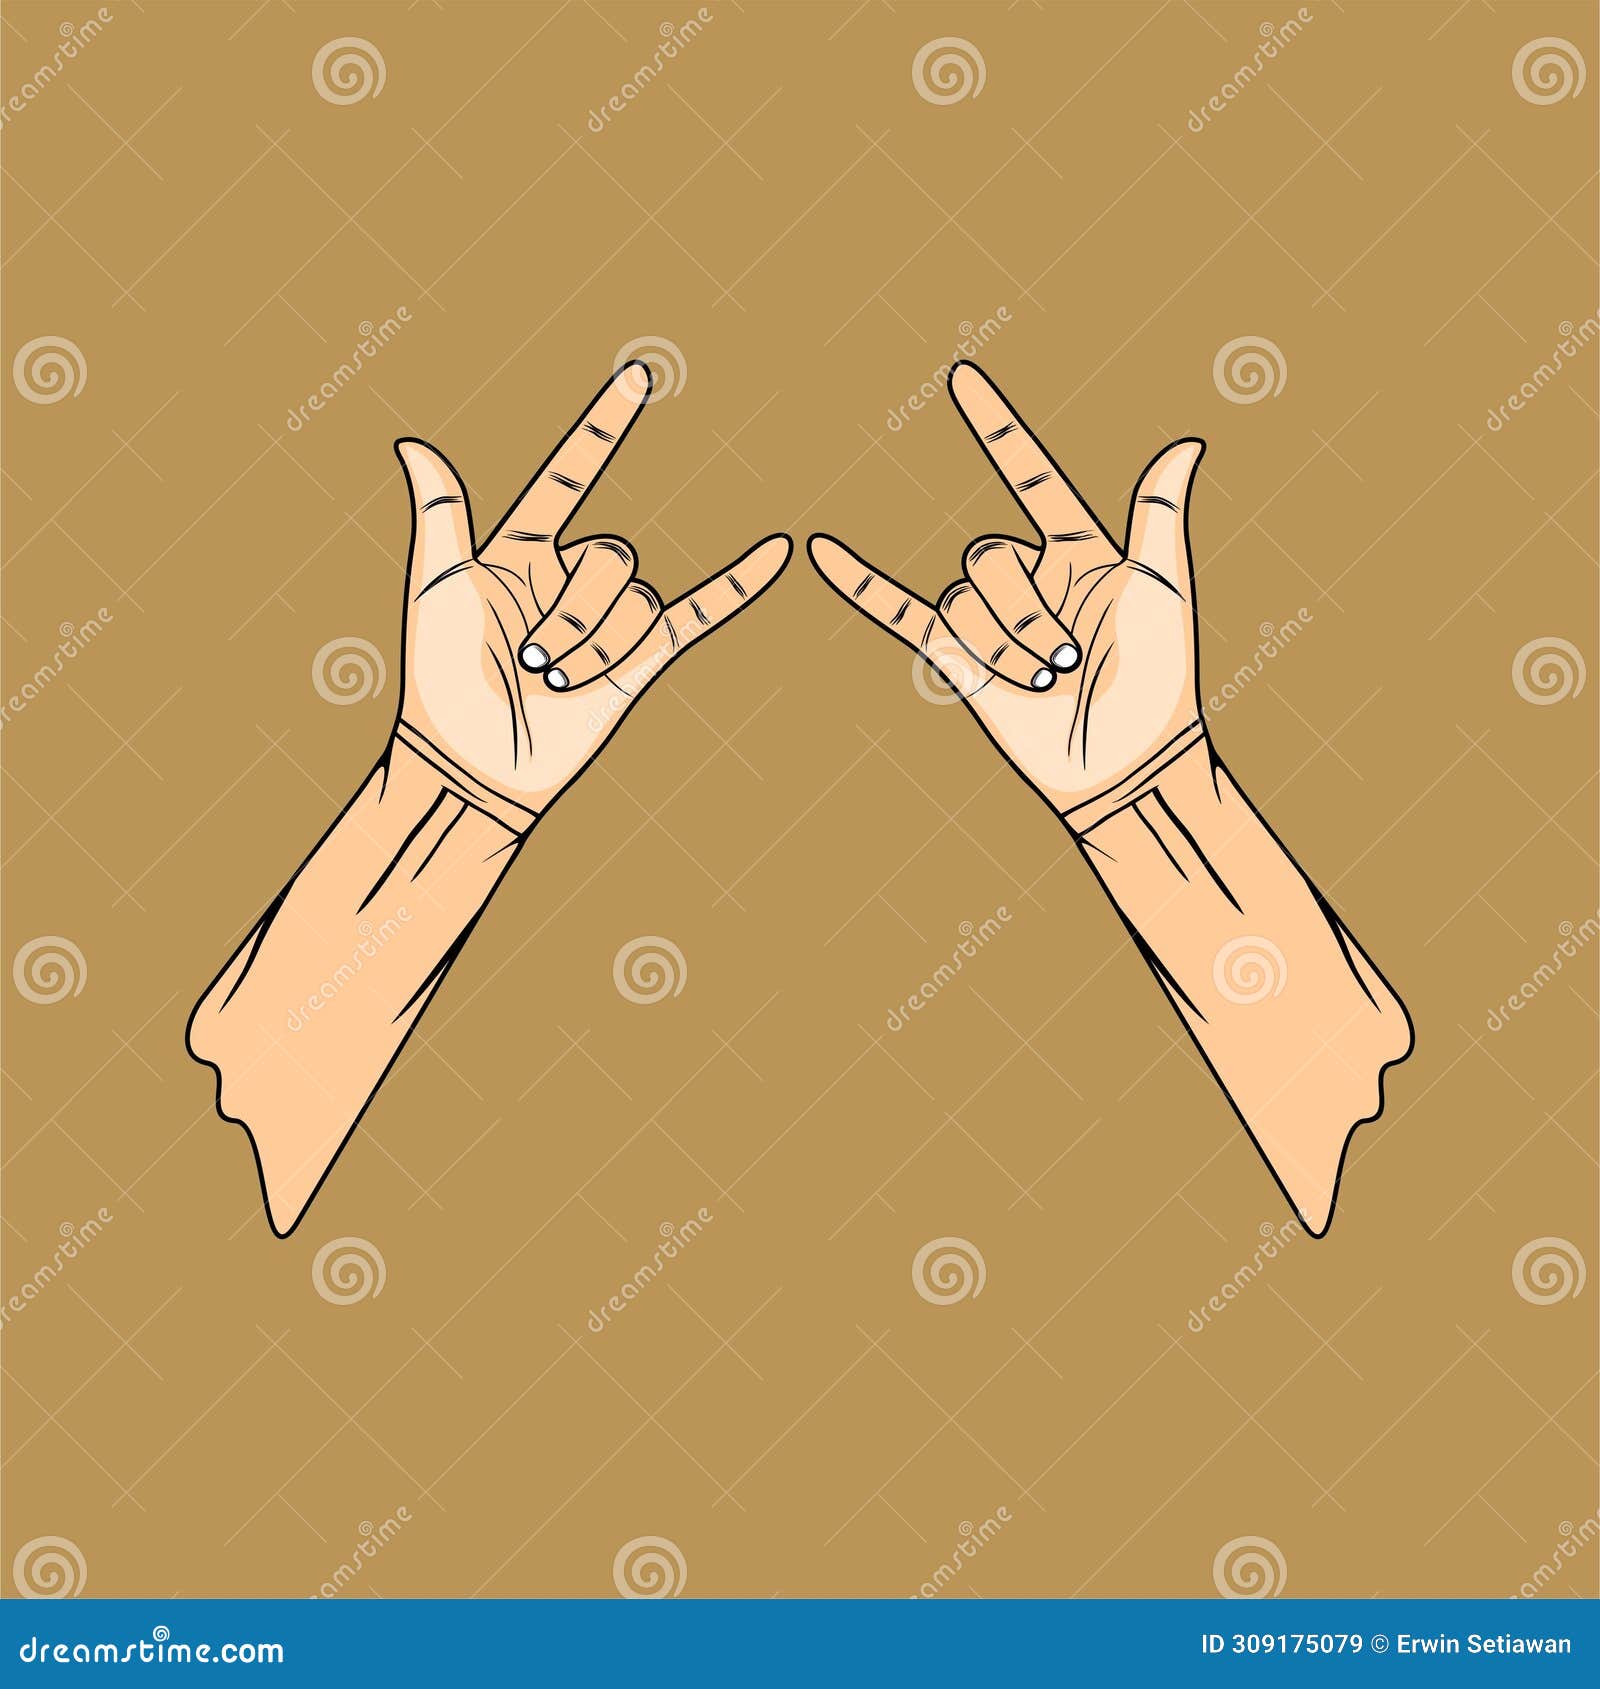 Premium Vector | I love you heart sign valentine day and expression to you  message of love using hand gesture